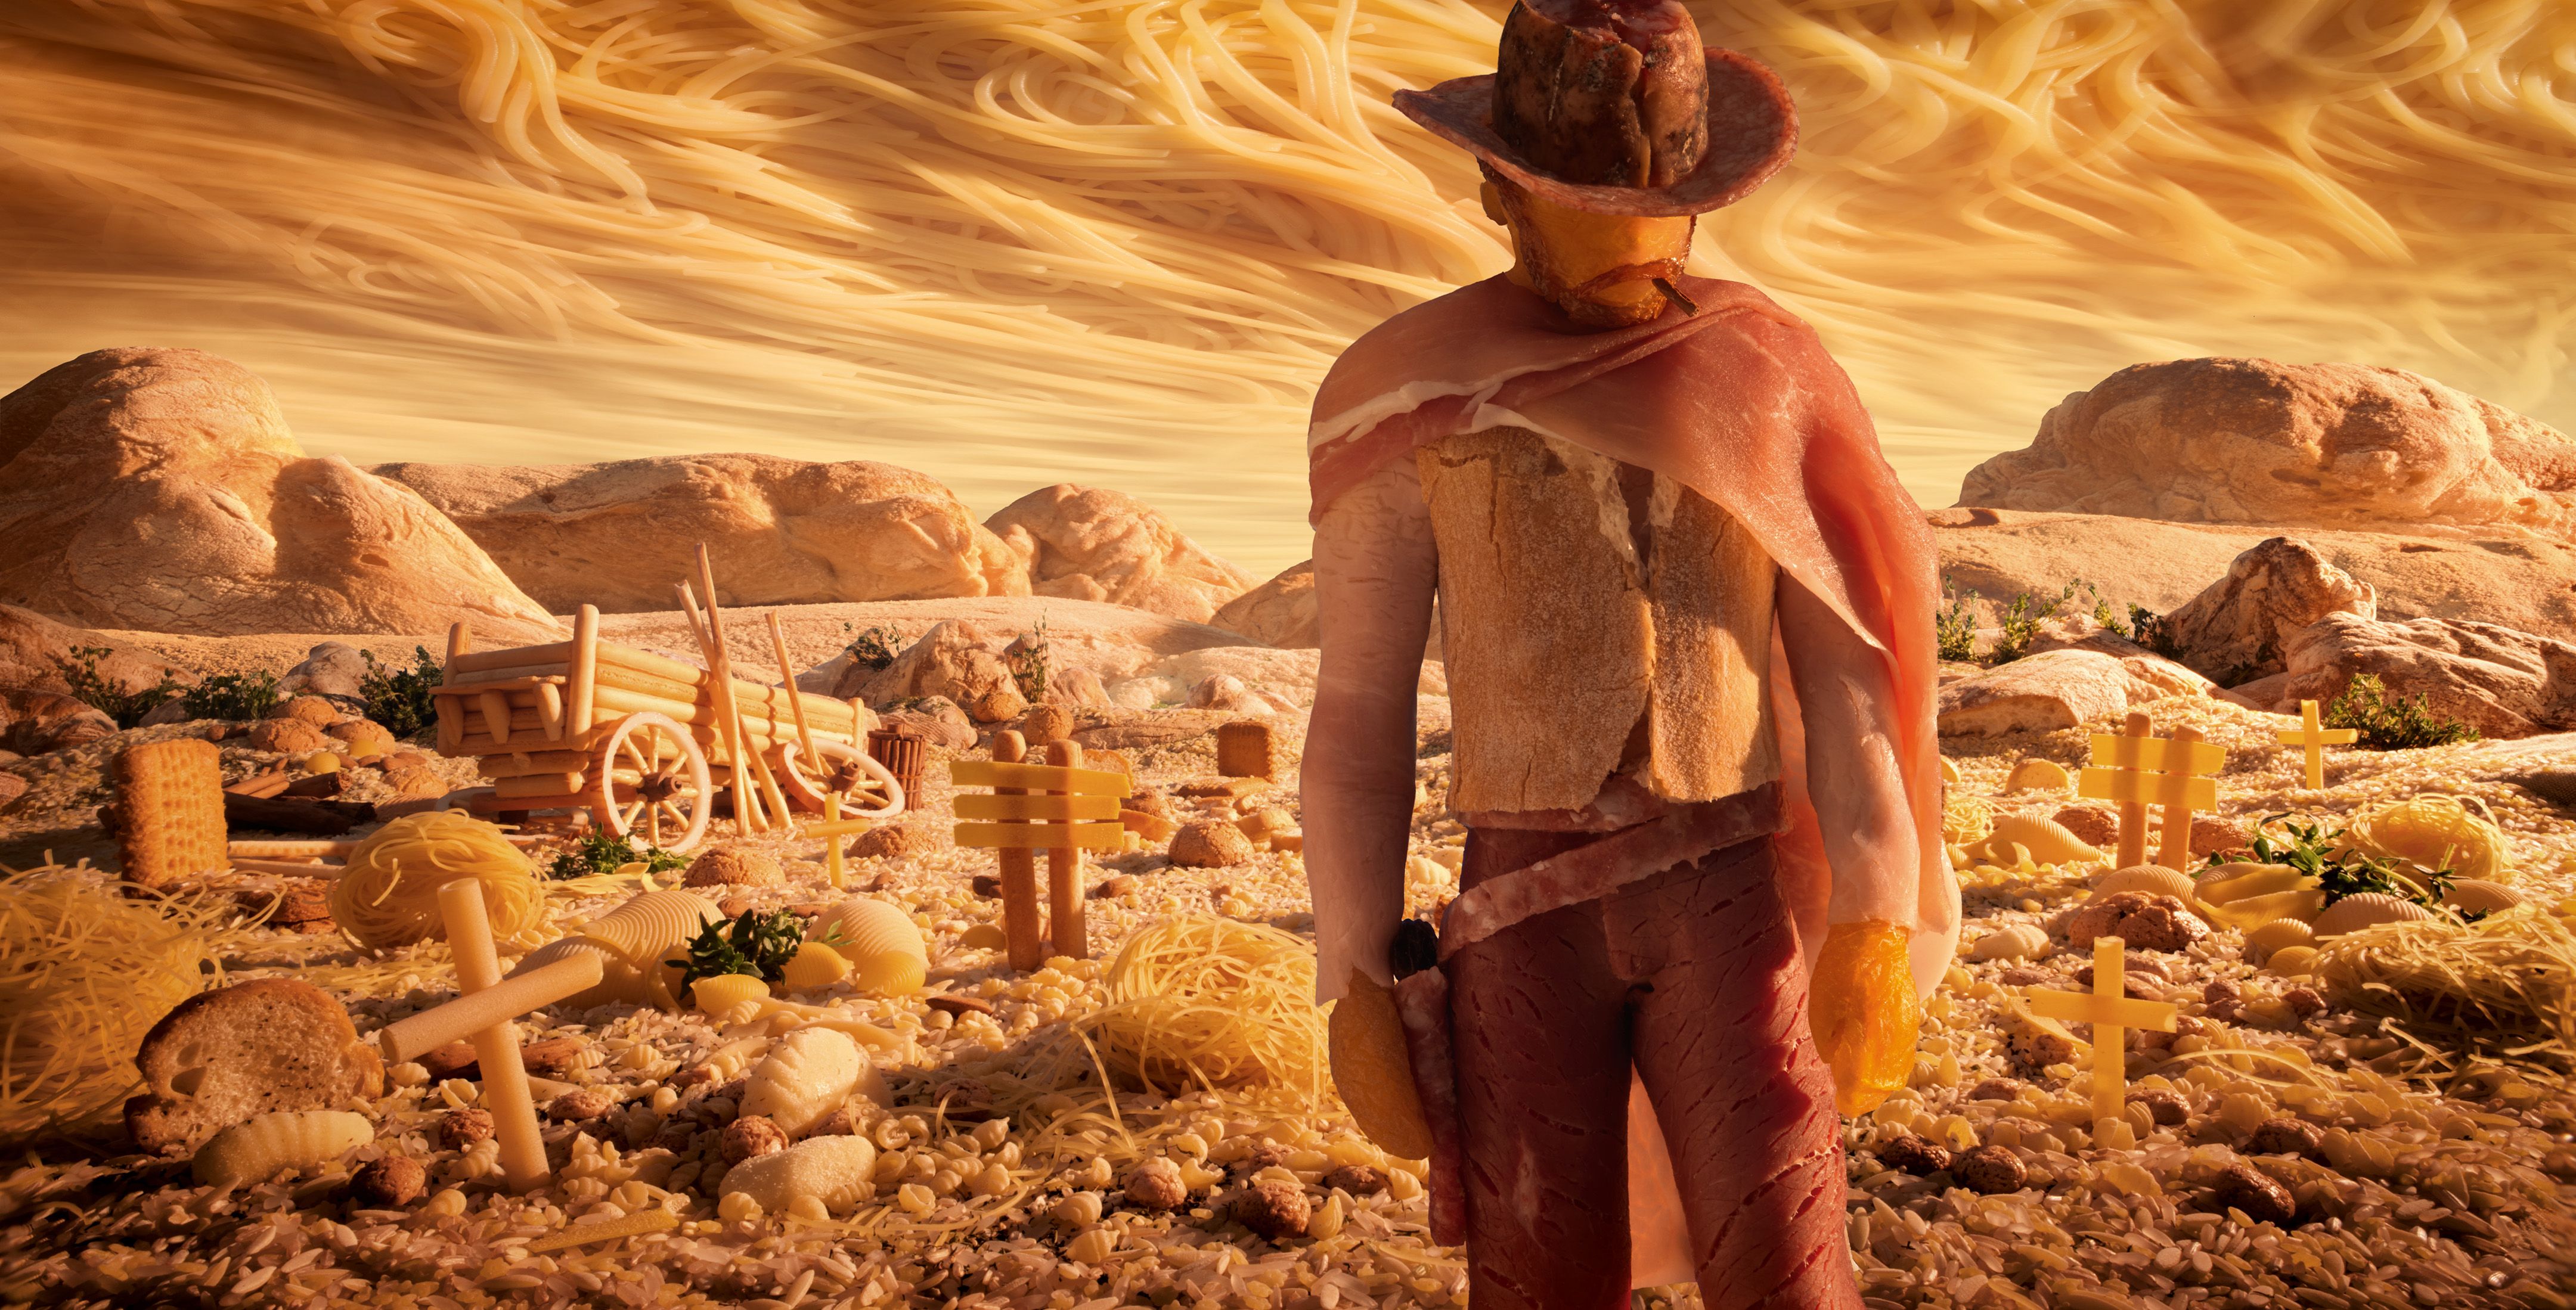 Spaghetti Western: The Good, The Bad &amp; The Ugly and Clint Eastwood re-created in food